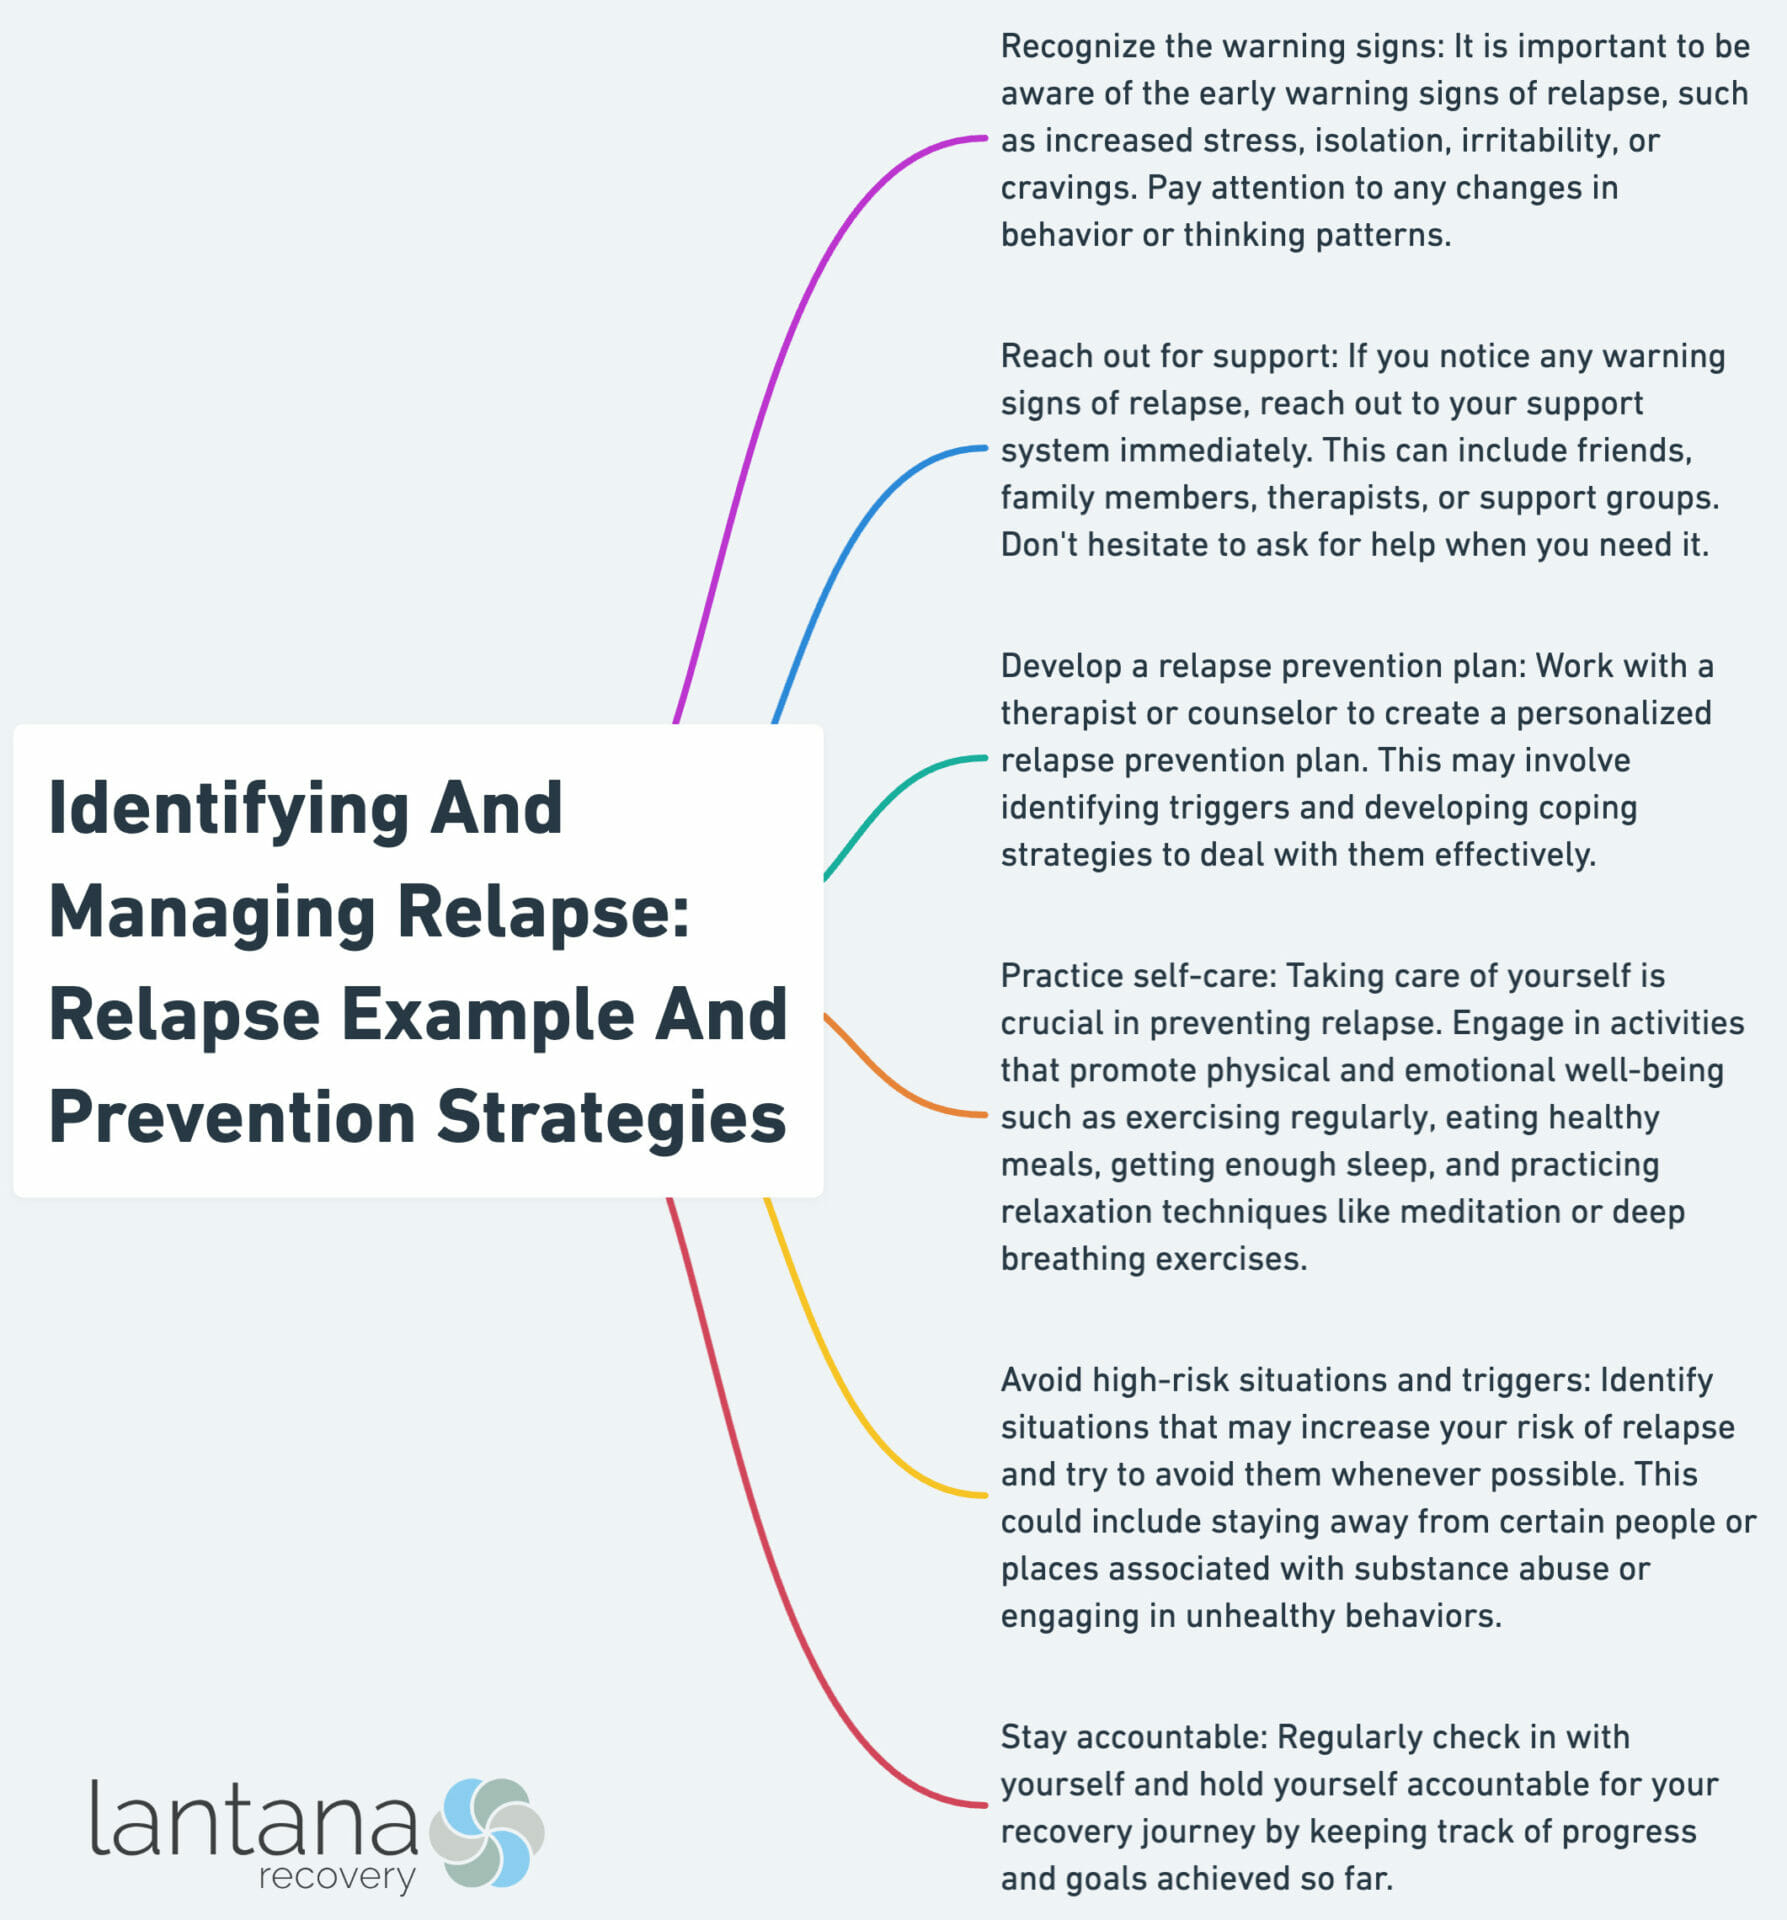 Identifying And Managing Relapse- Relapse Example And Prevention Strategies